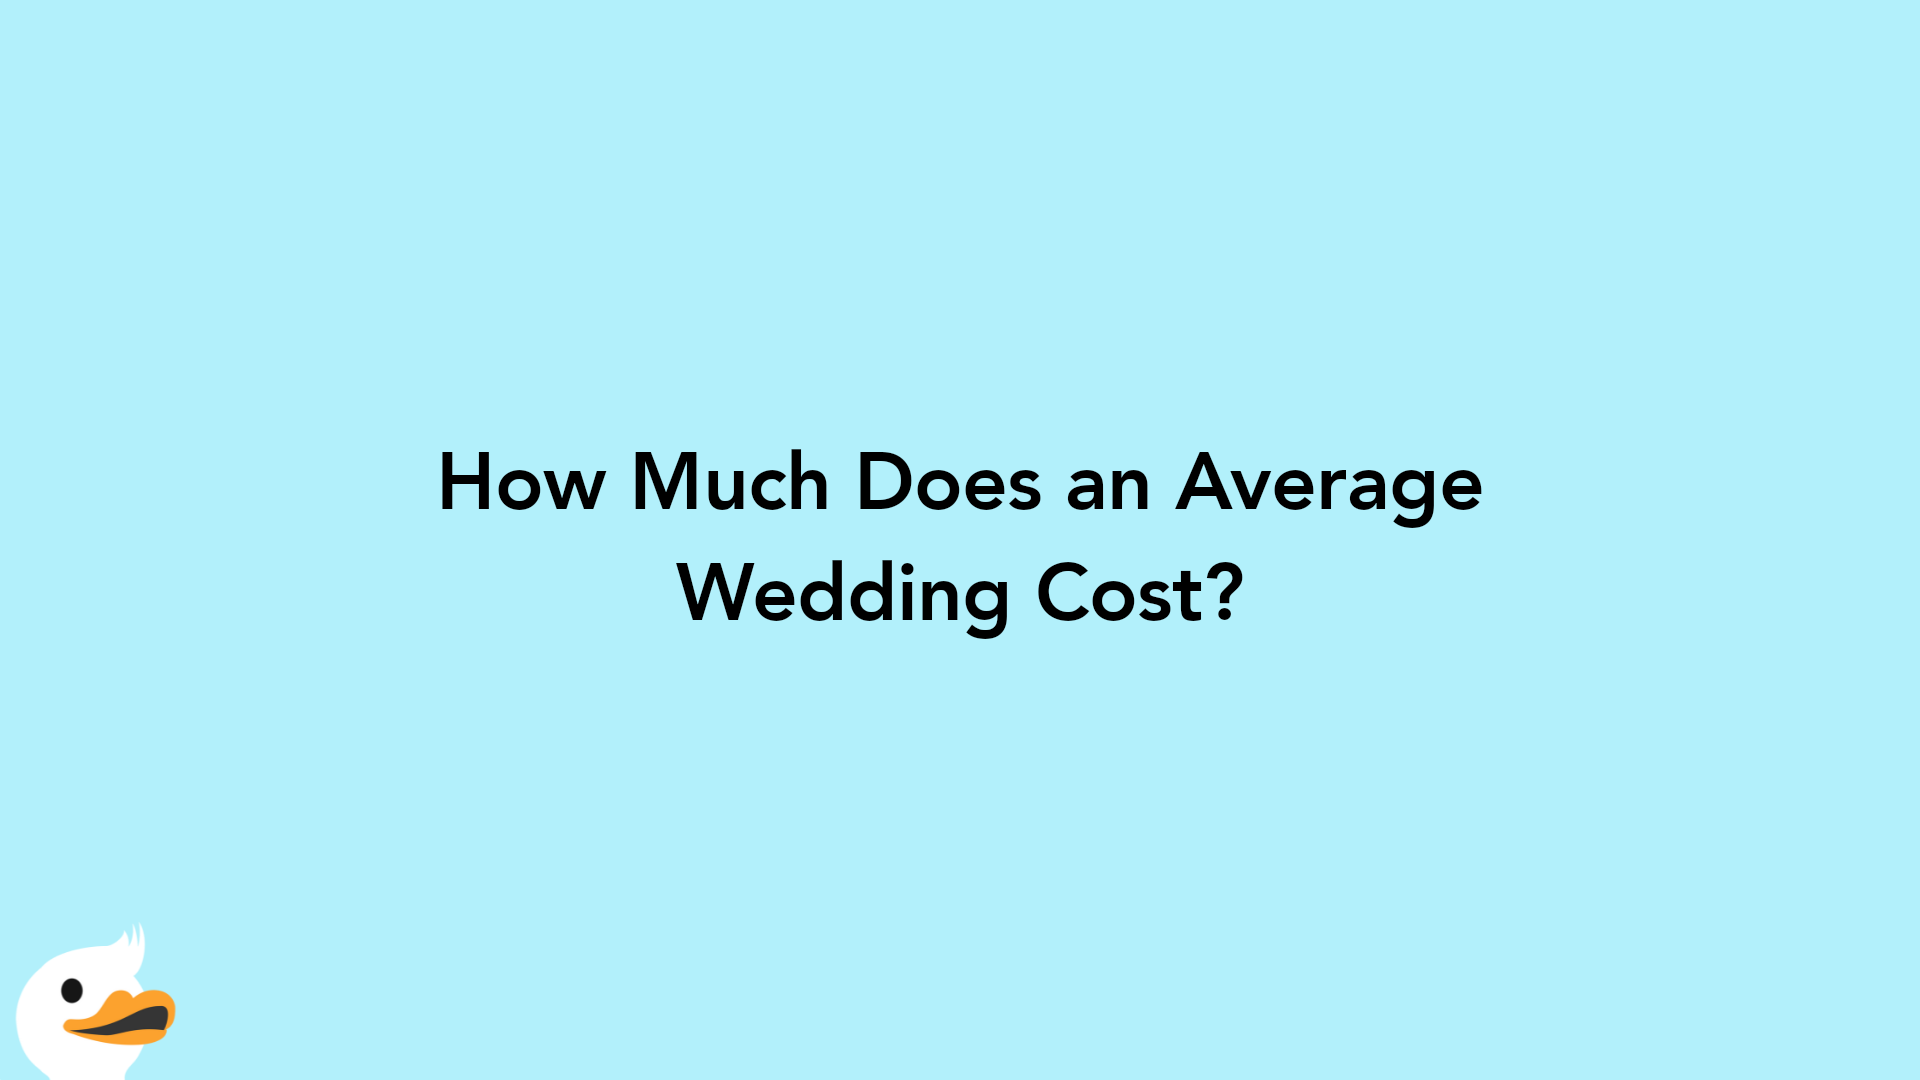 How Much Does an Average Wedding Cost?